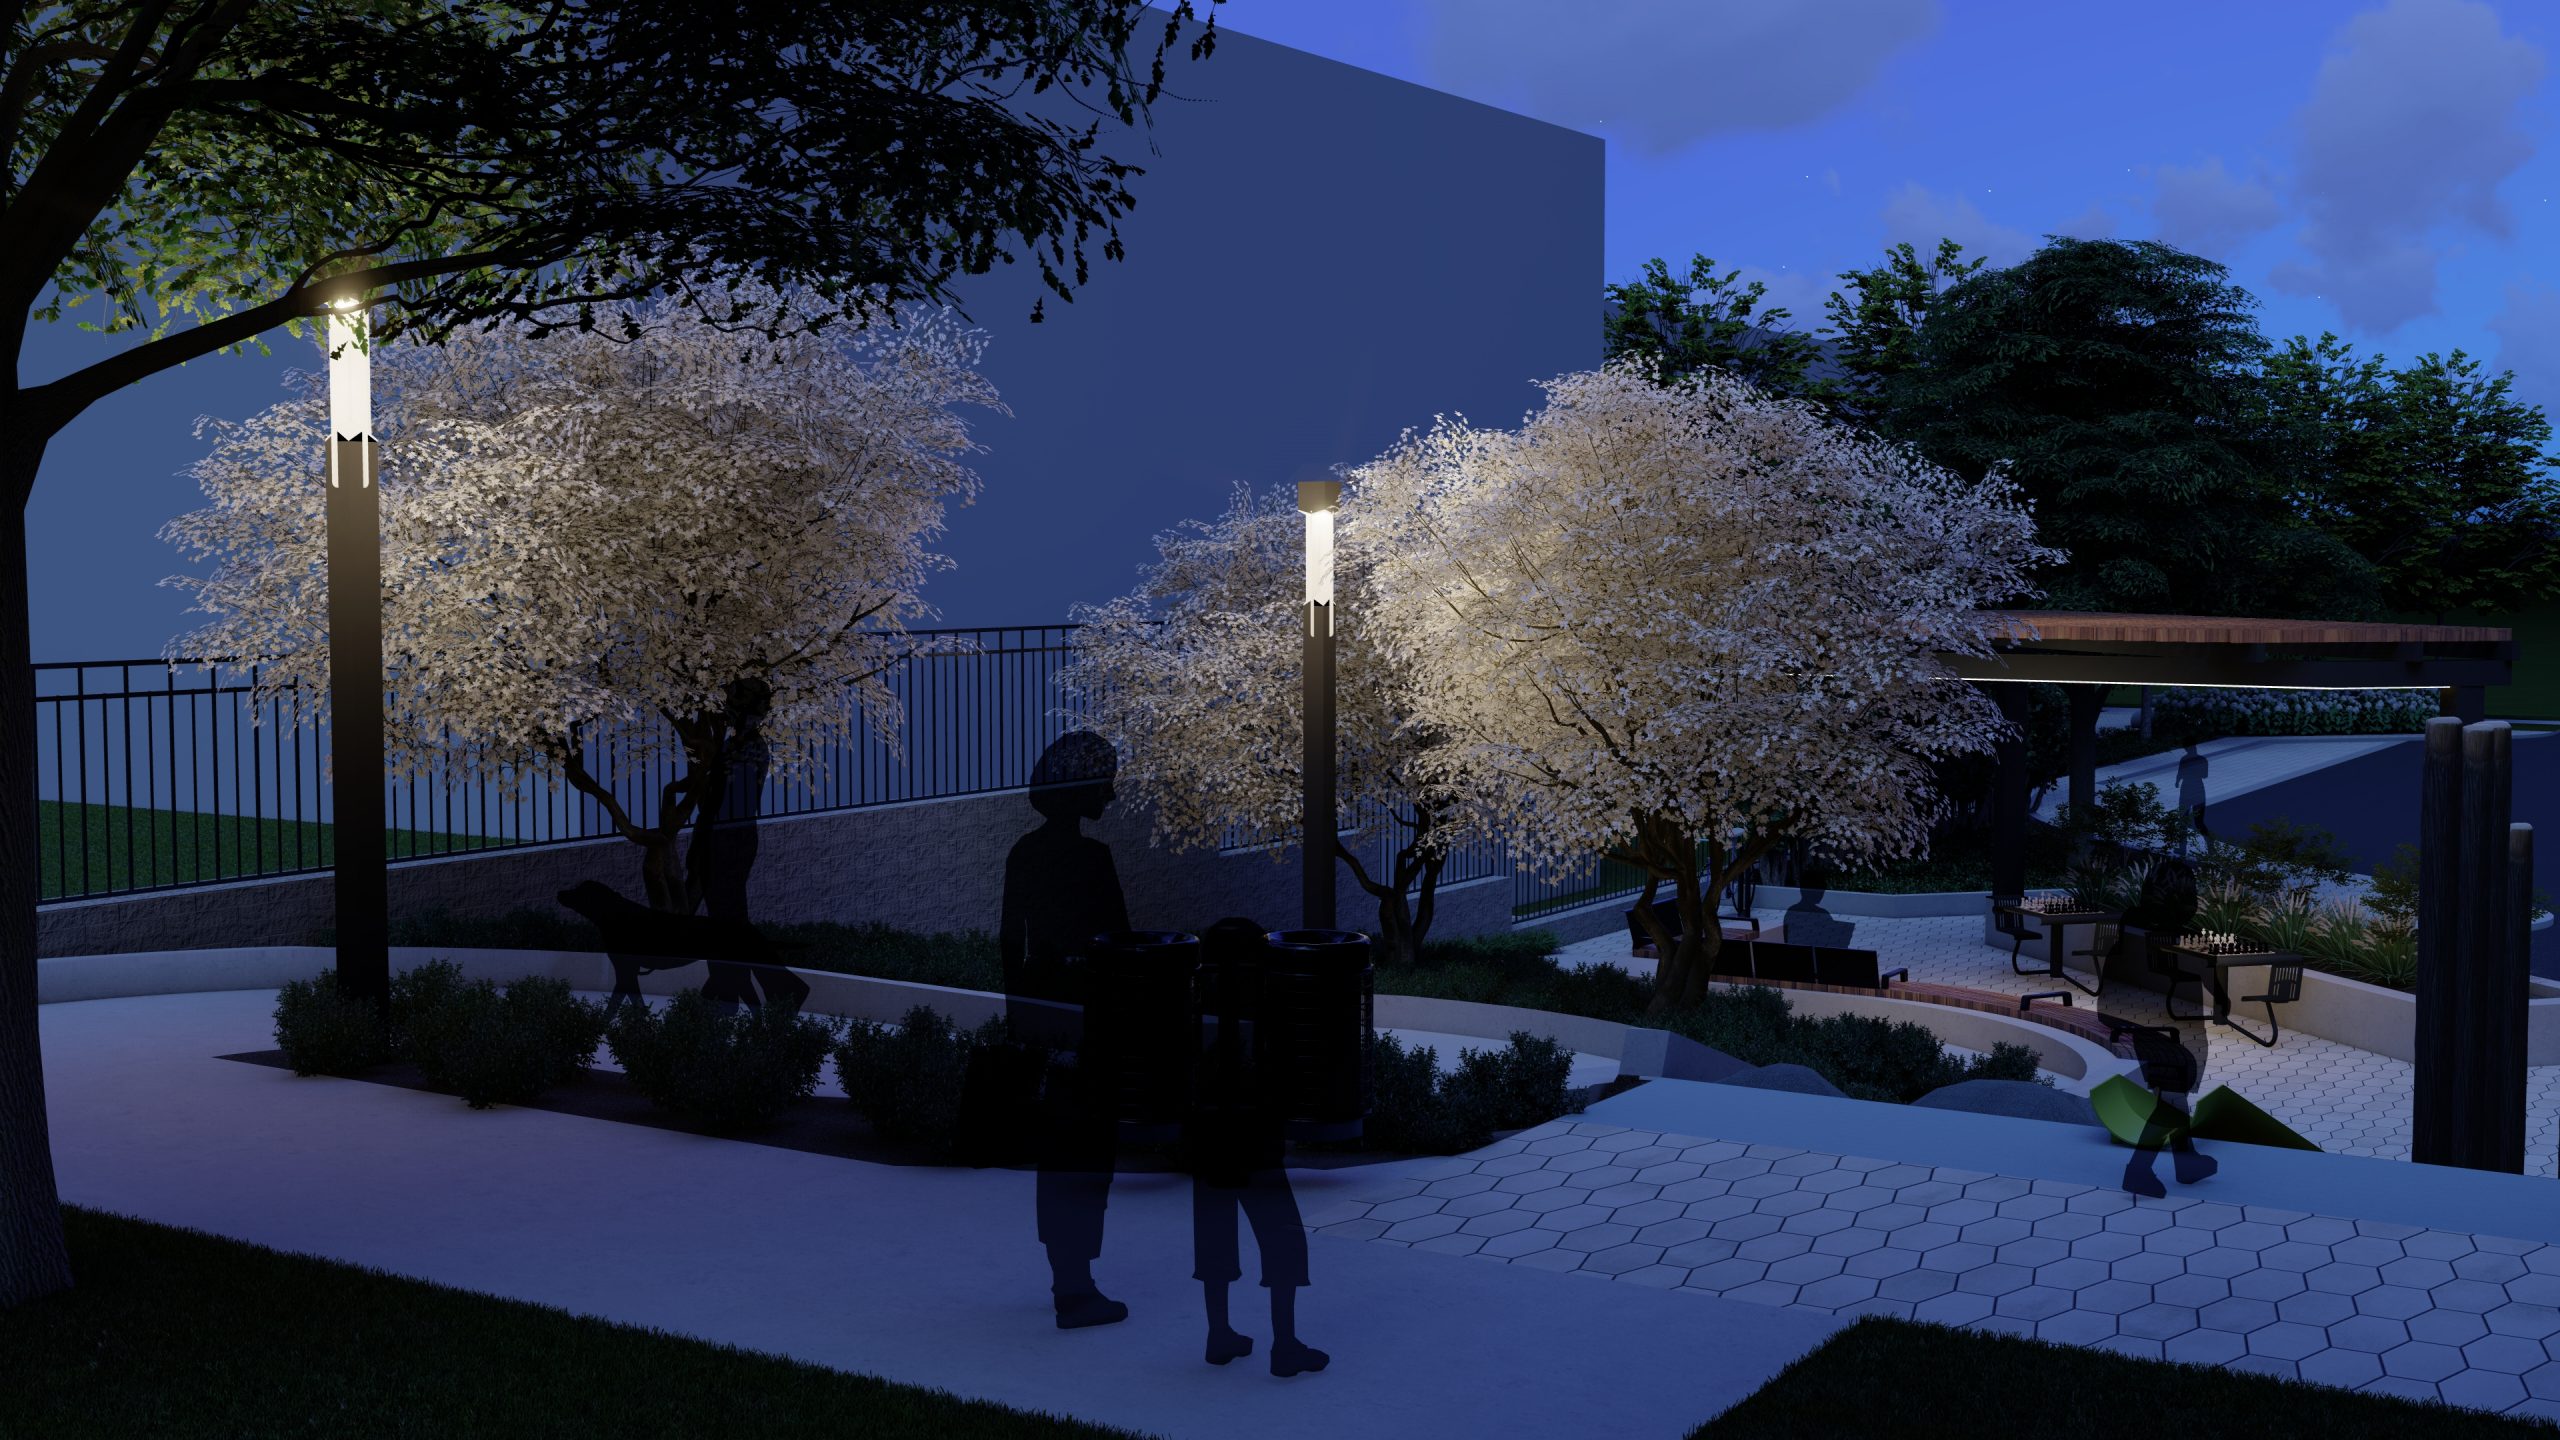 Perspective rendering of the revised concept design, providing a night time view of the new park looking southeast from the entrance at Glengarry Avenue. Pictured are park users sitting and walking throughout the park, light poles, and the shade structure in the background.